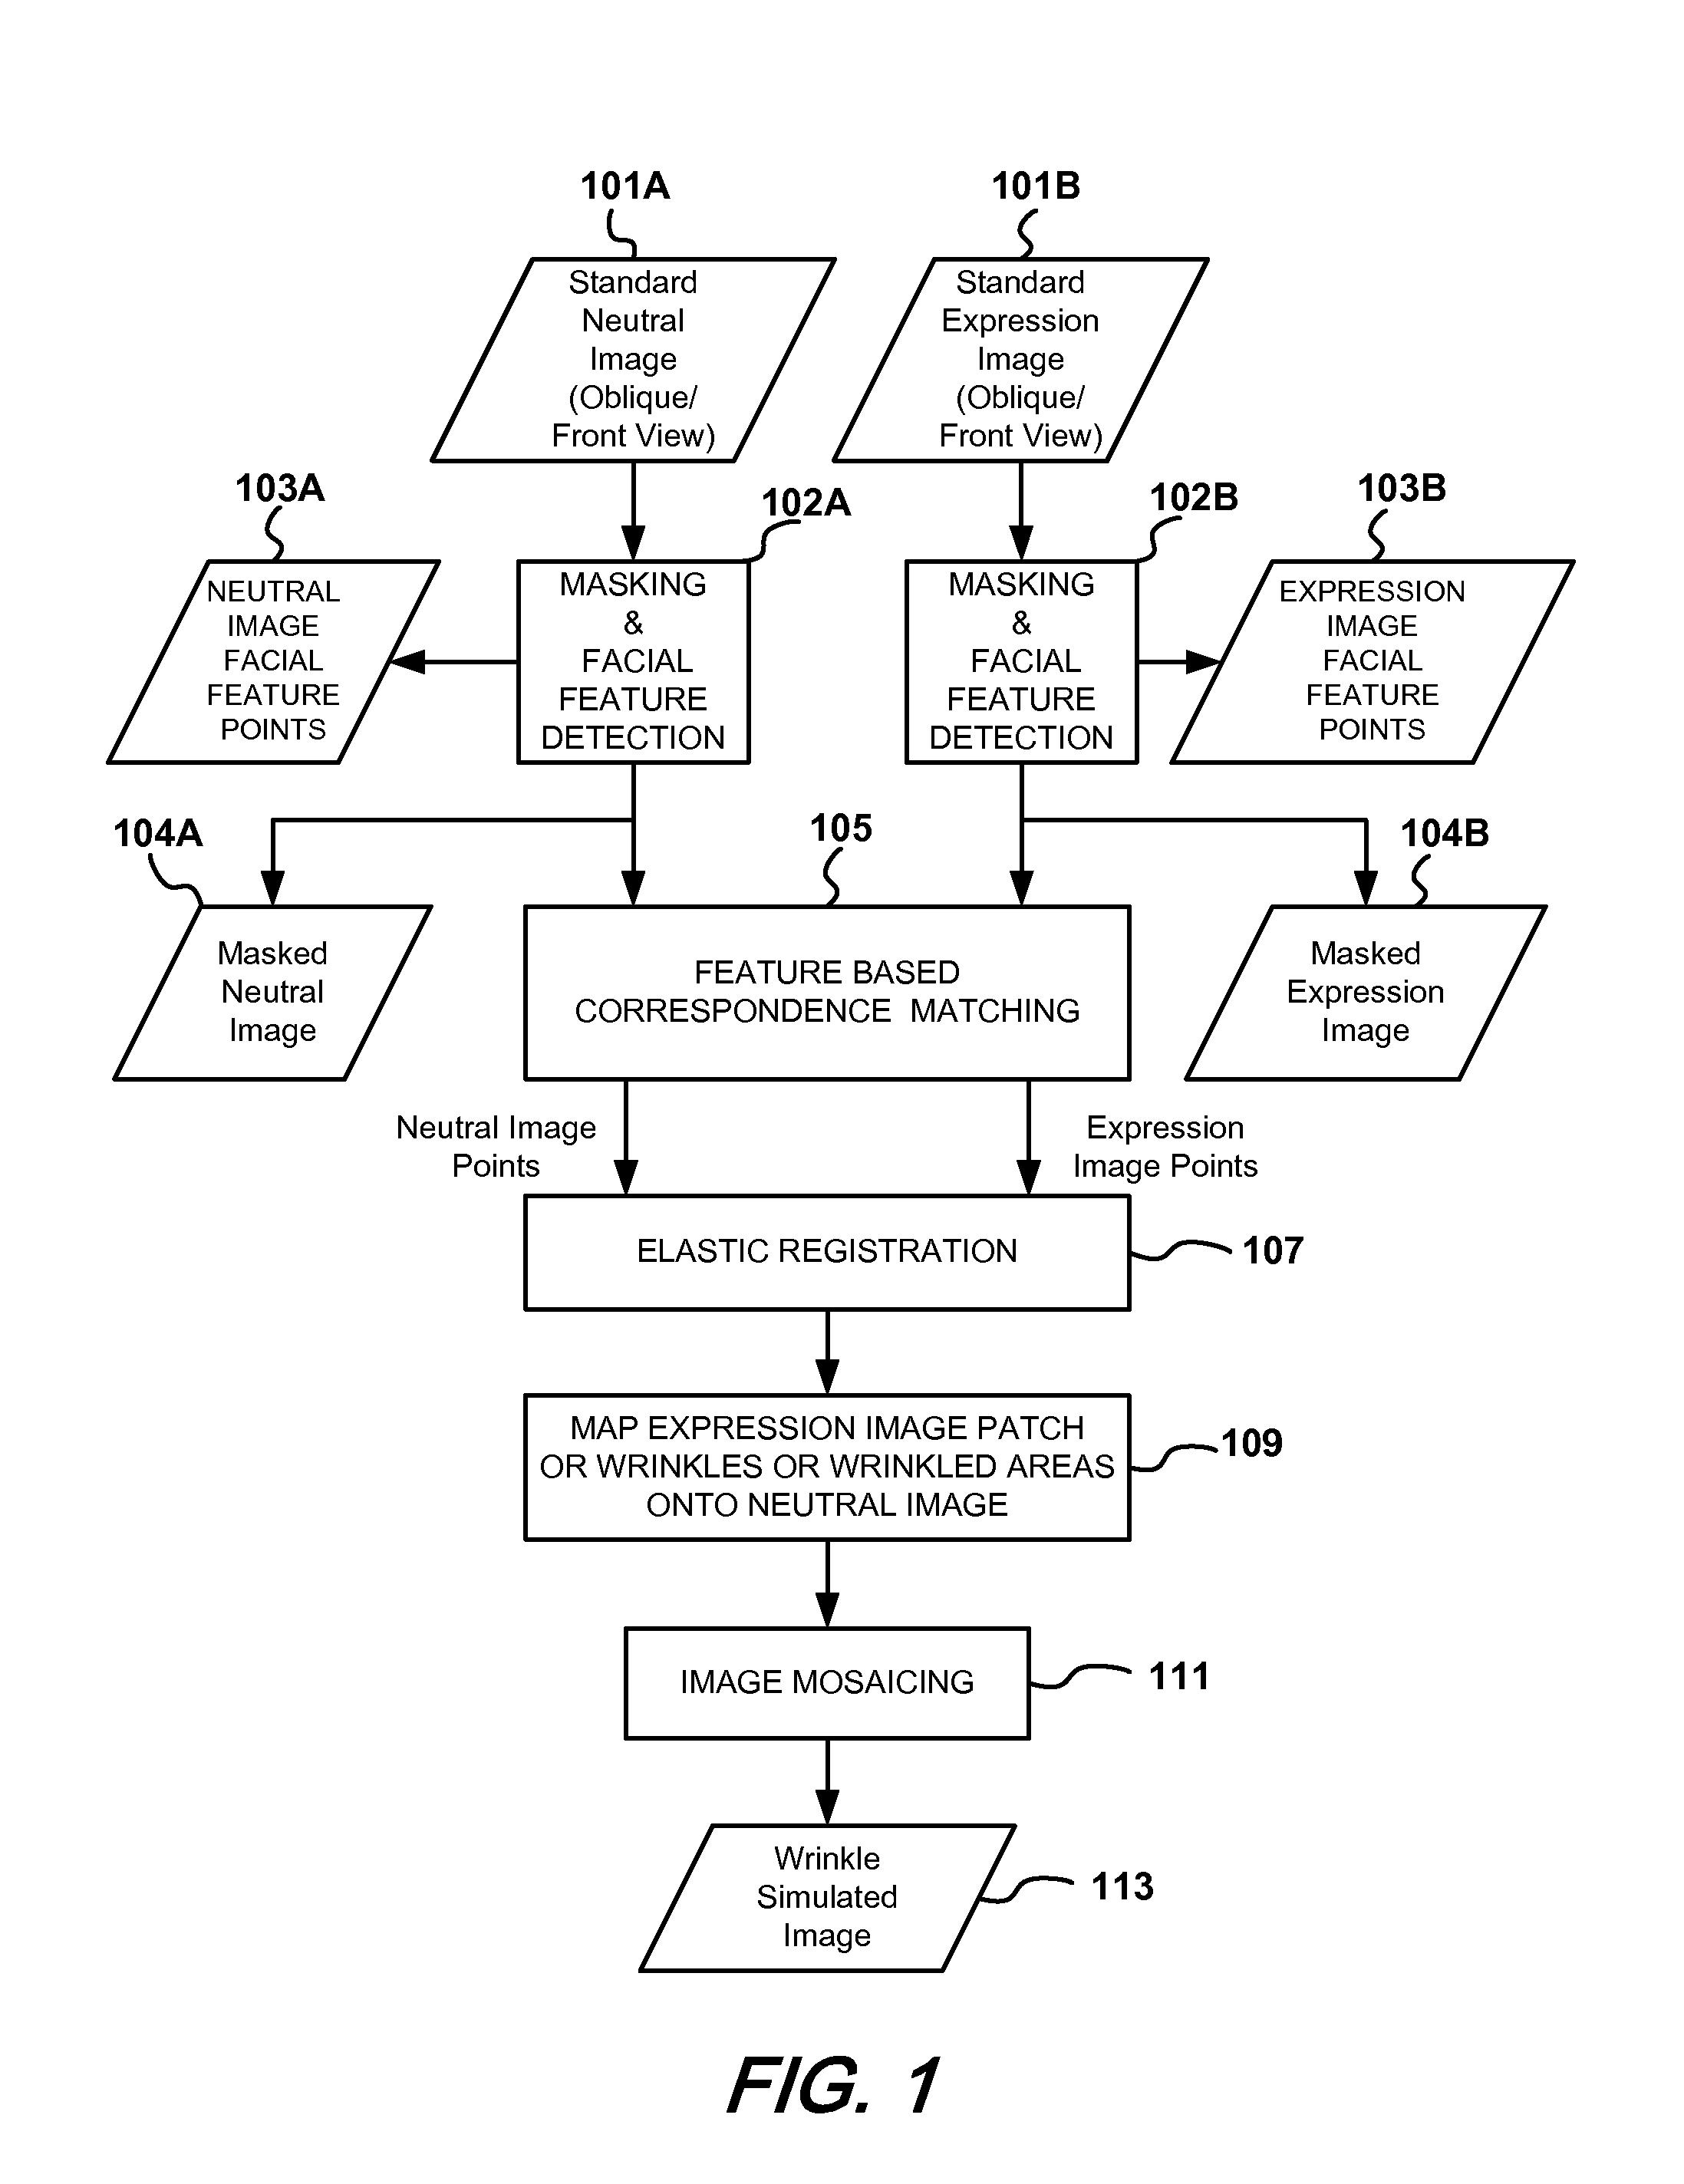 Method and apparatus for realistic simulation of wrinkle aging and de-aging